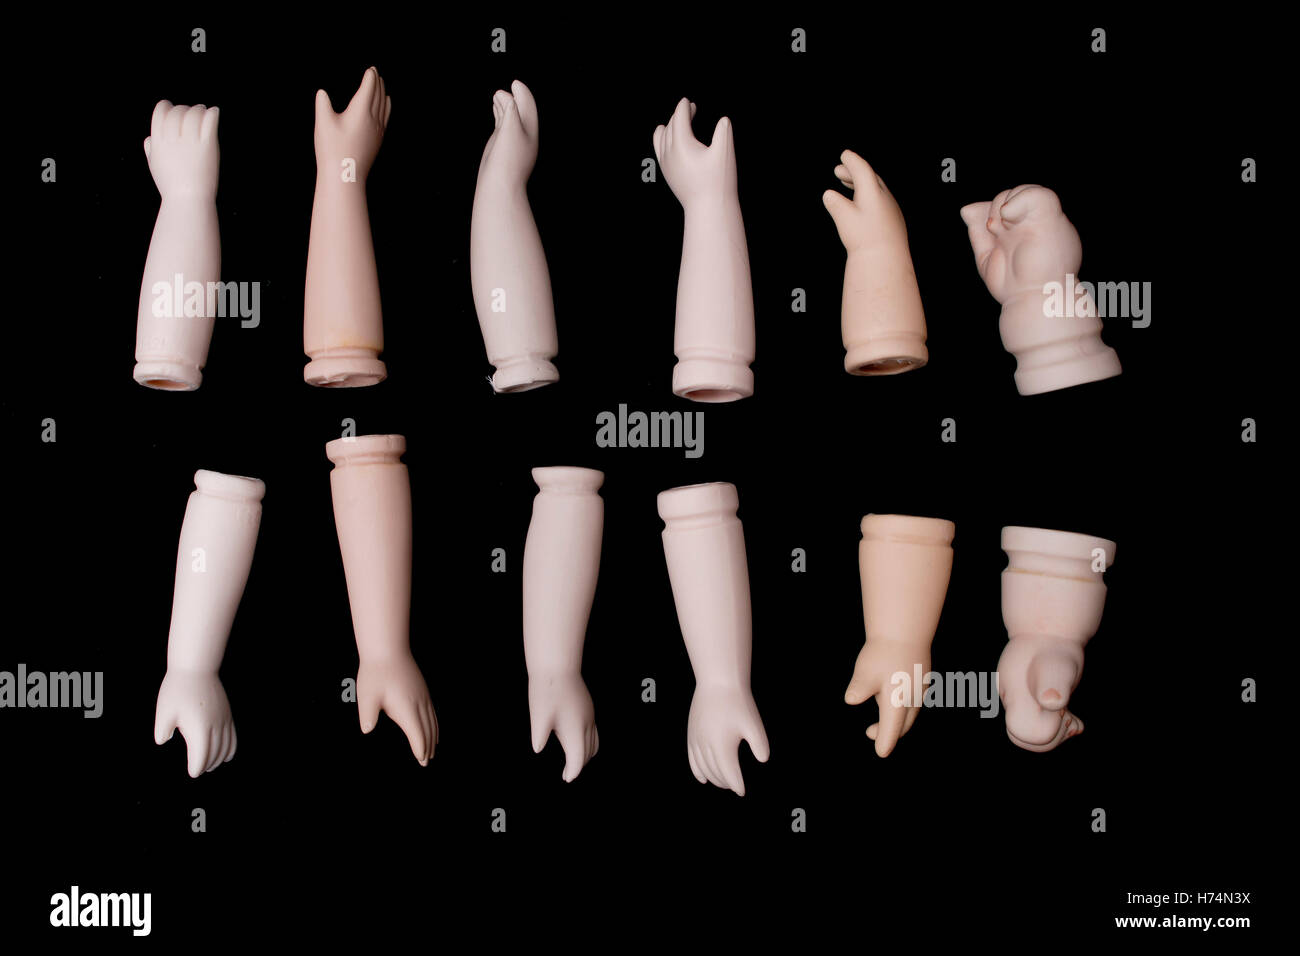 Broken Doll Body Parts Hands and Arms on Black Background Stock Photo -  Alamy